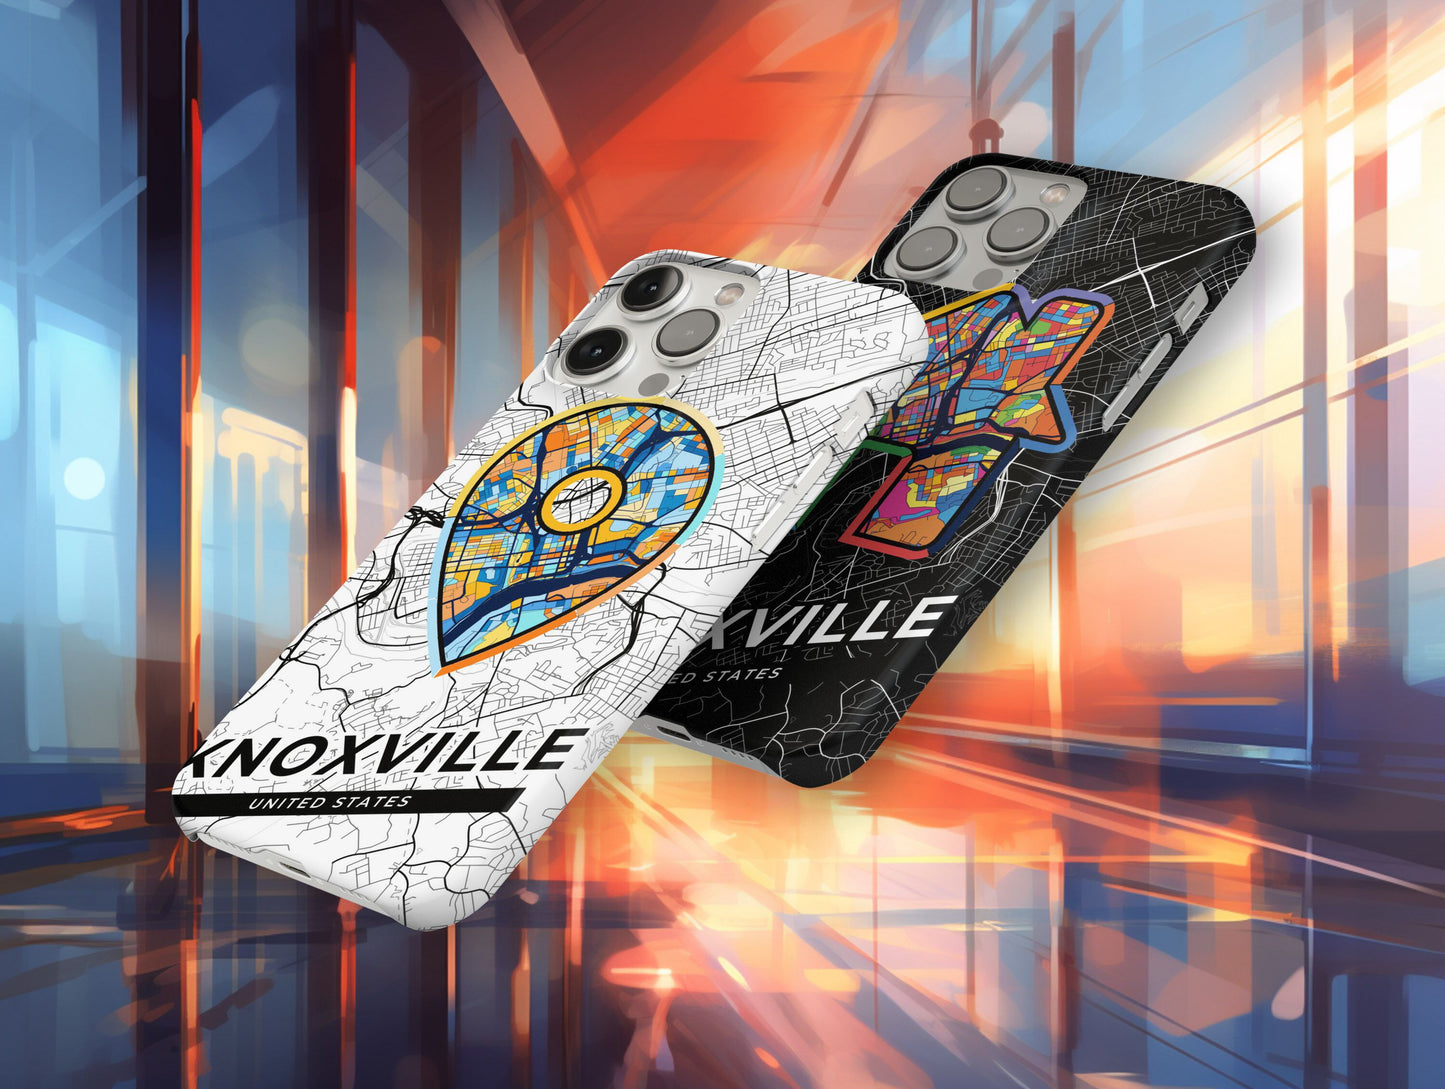 Knoxville Tennessee slim phone case with colorful icon. Birthday, wedding or housewarming gift. Couple match cases.